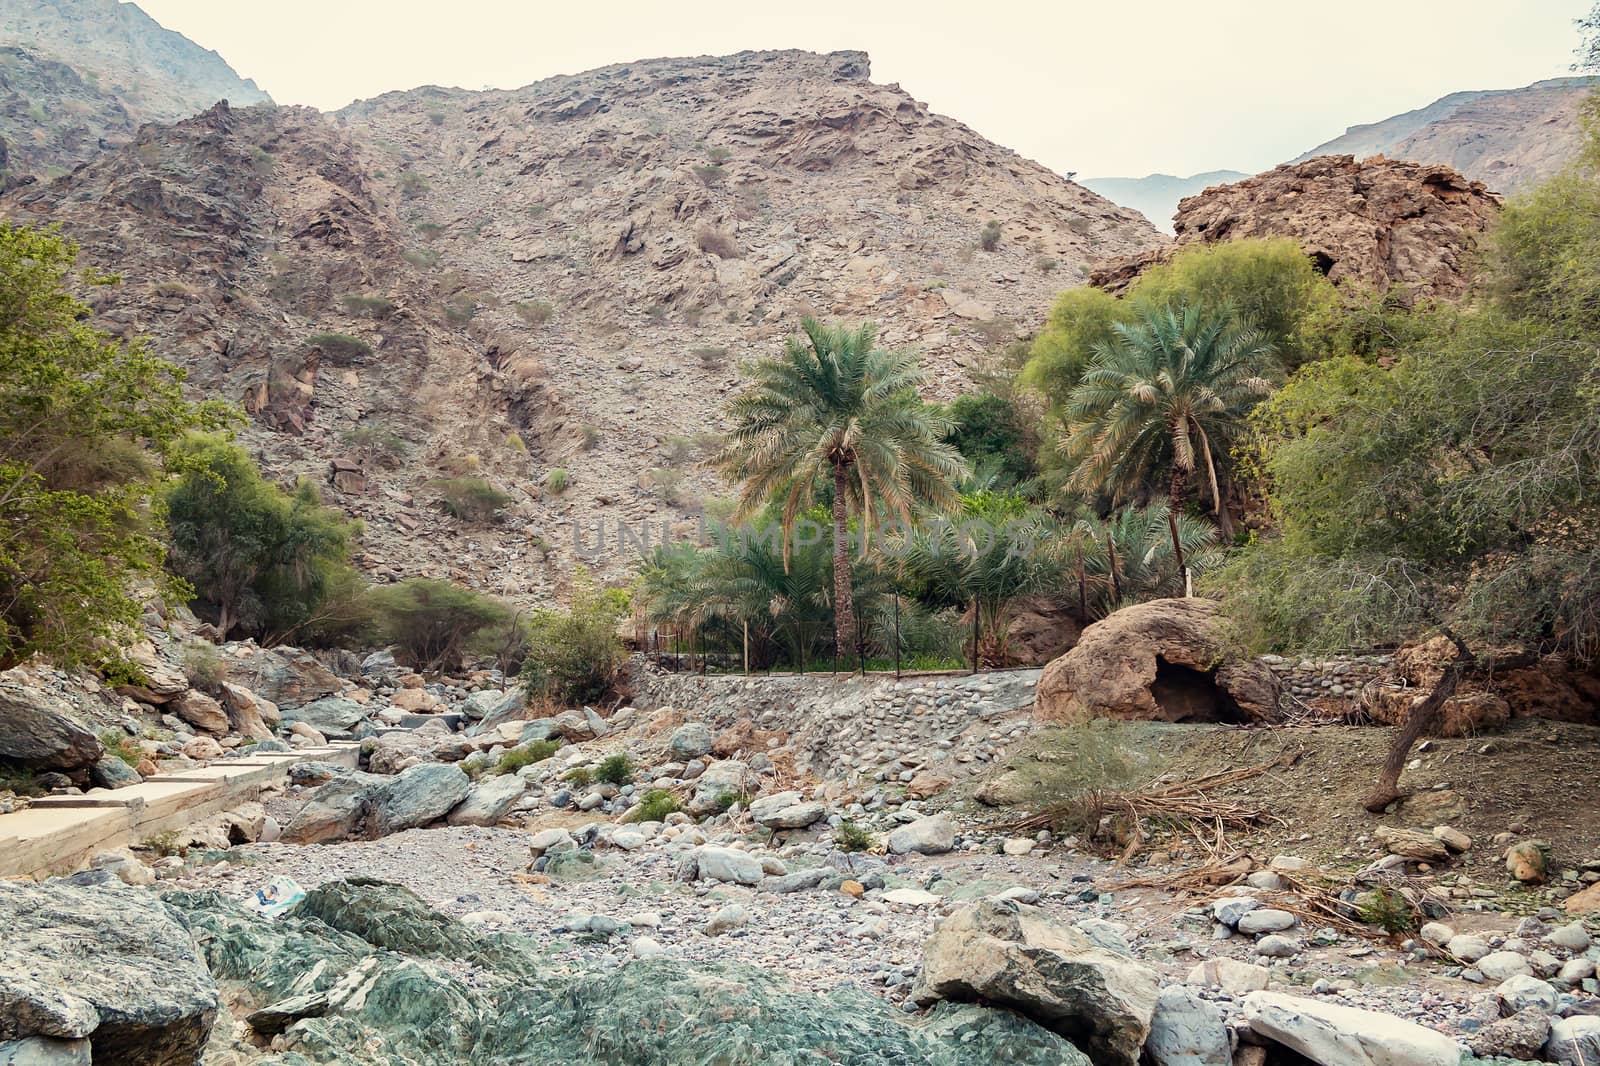 Parched riverbed called wadi in Asia, in the outskirts of Muscat, Oman by galsand